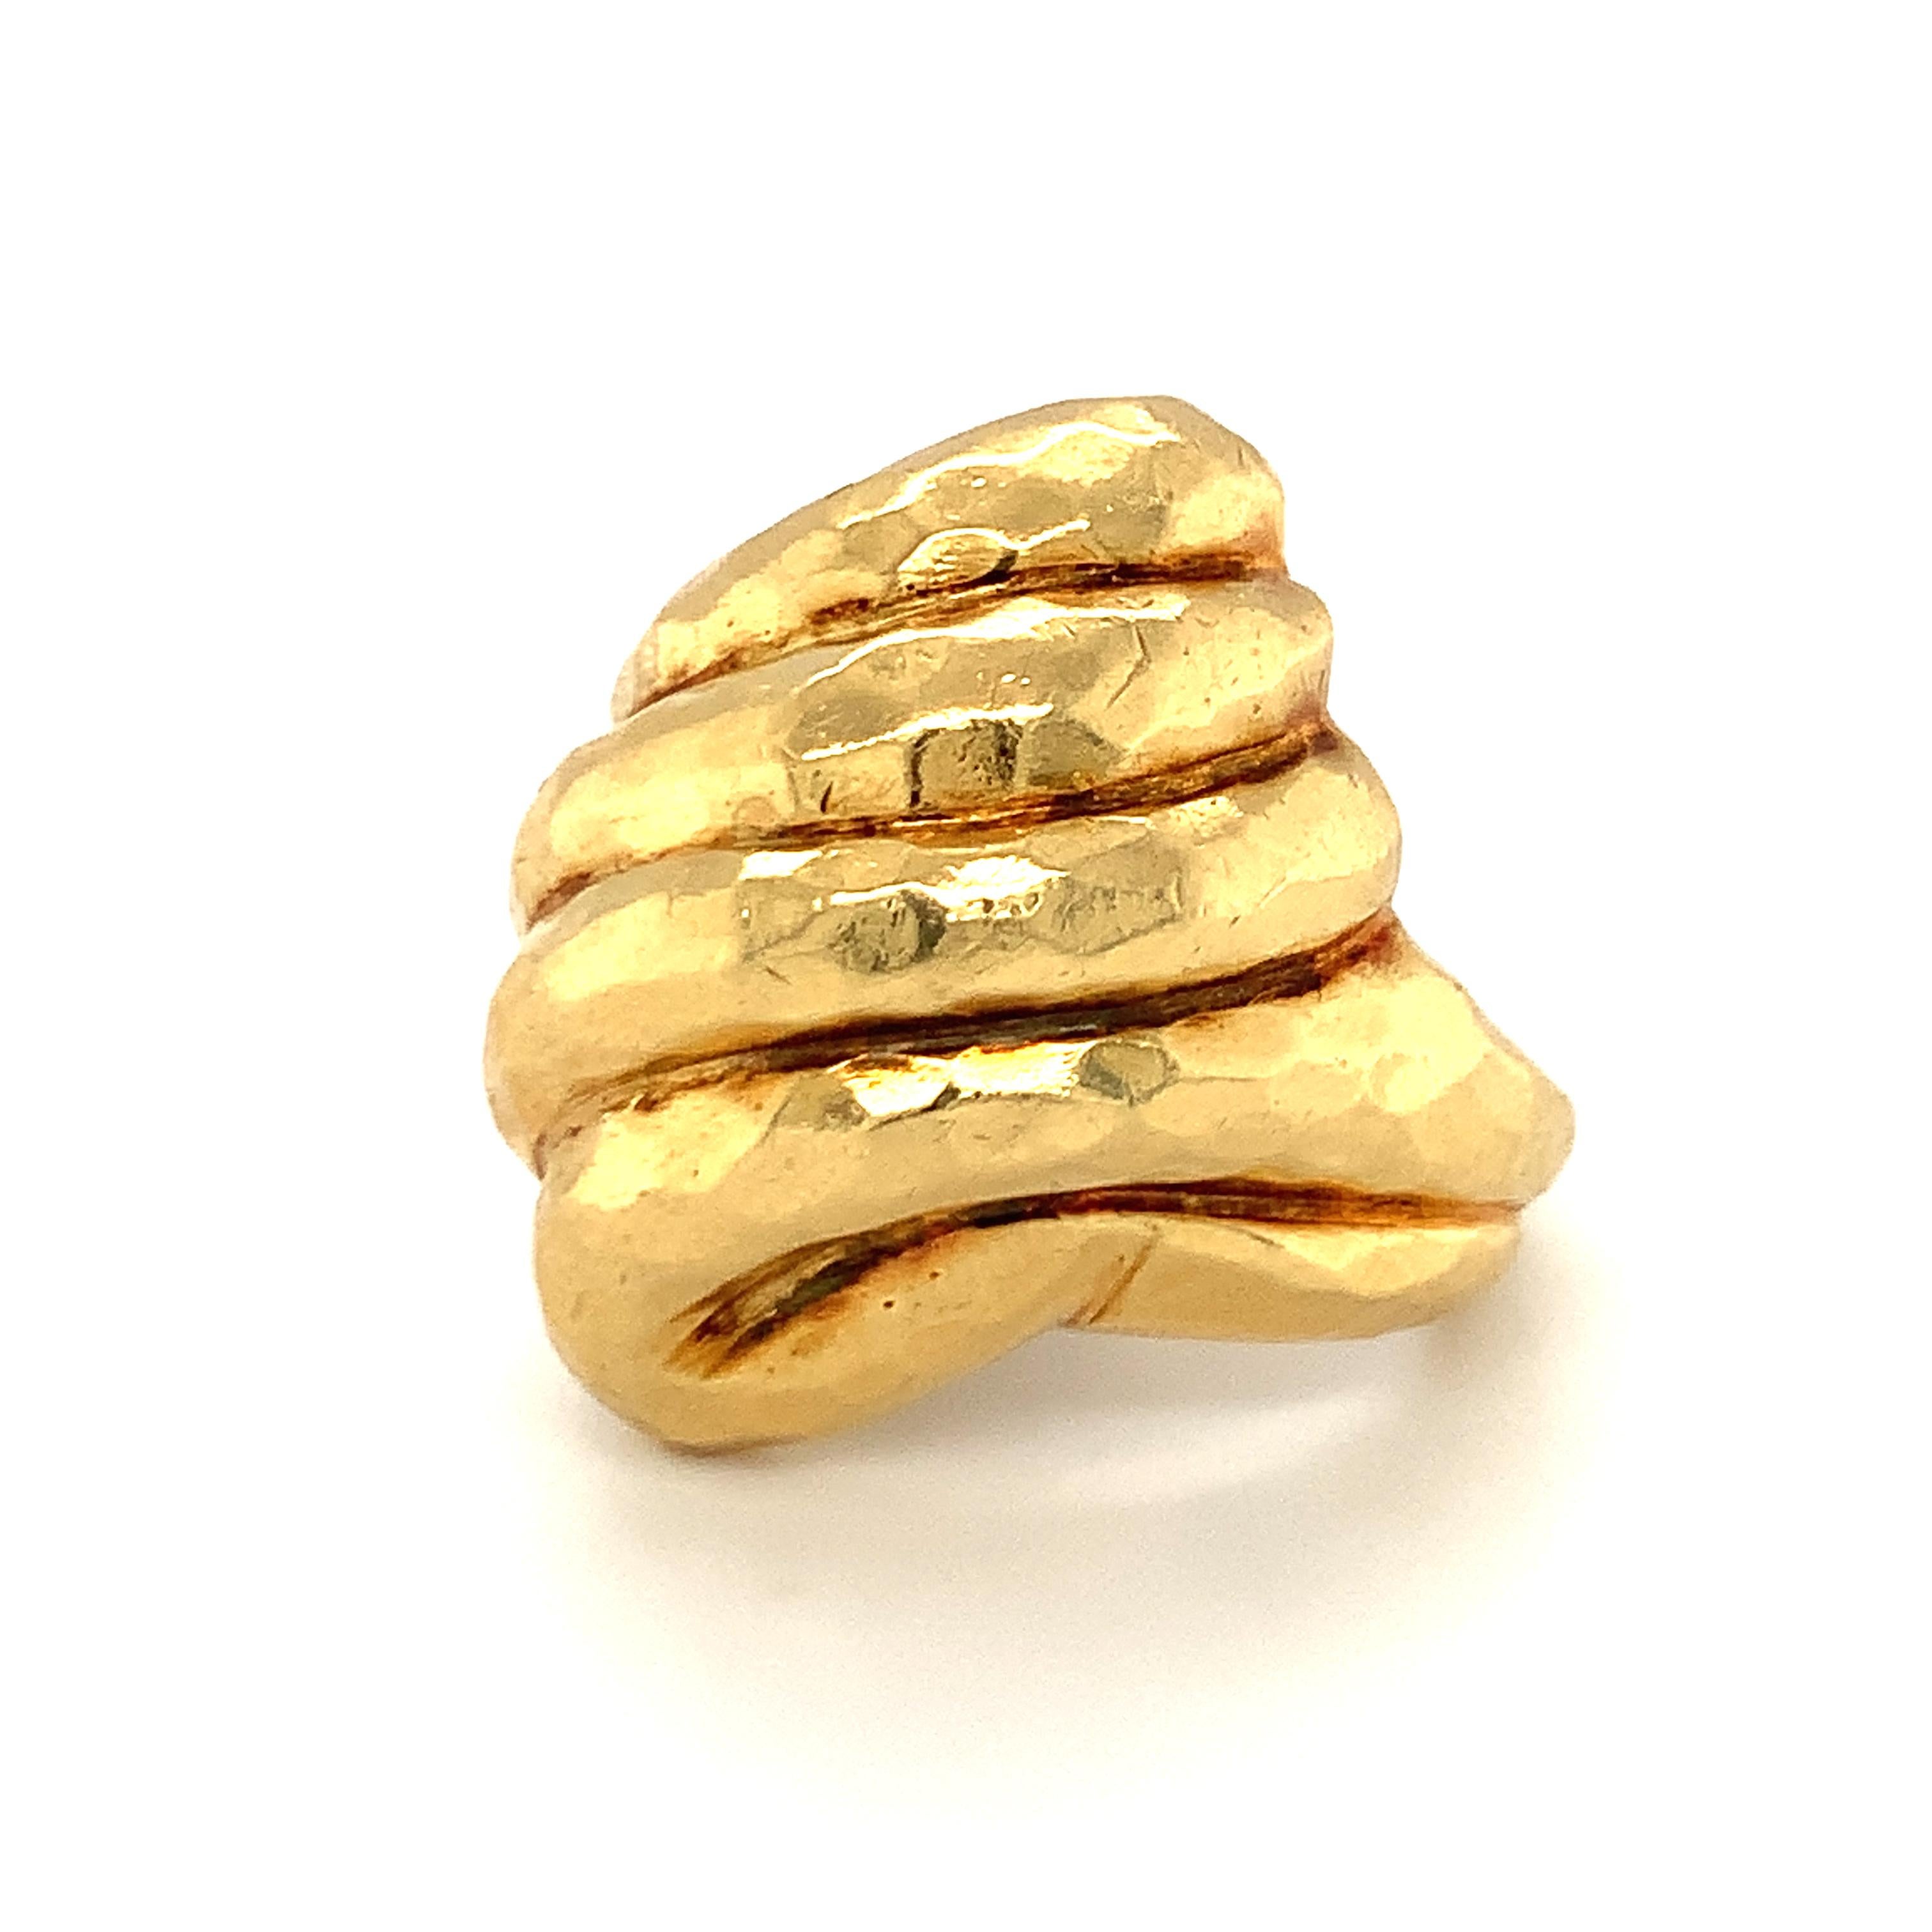 One hammered 18K yellow gold ring with textured, high polish finish throughout in the Henry Dunay style. The ring features a marquise shape measuring 28 x 22 millimeters across the top portion.

Lustrous, substantial, dramatic.

Metal: 18K yellow